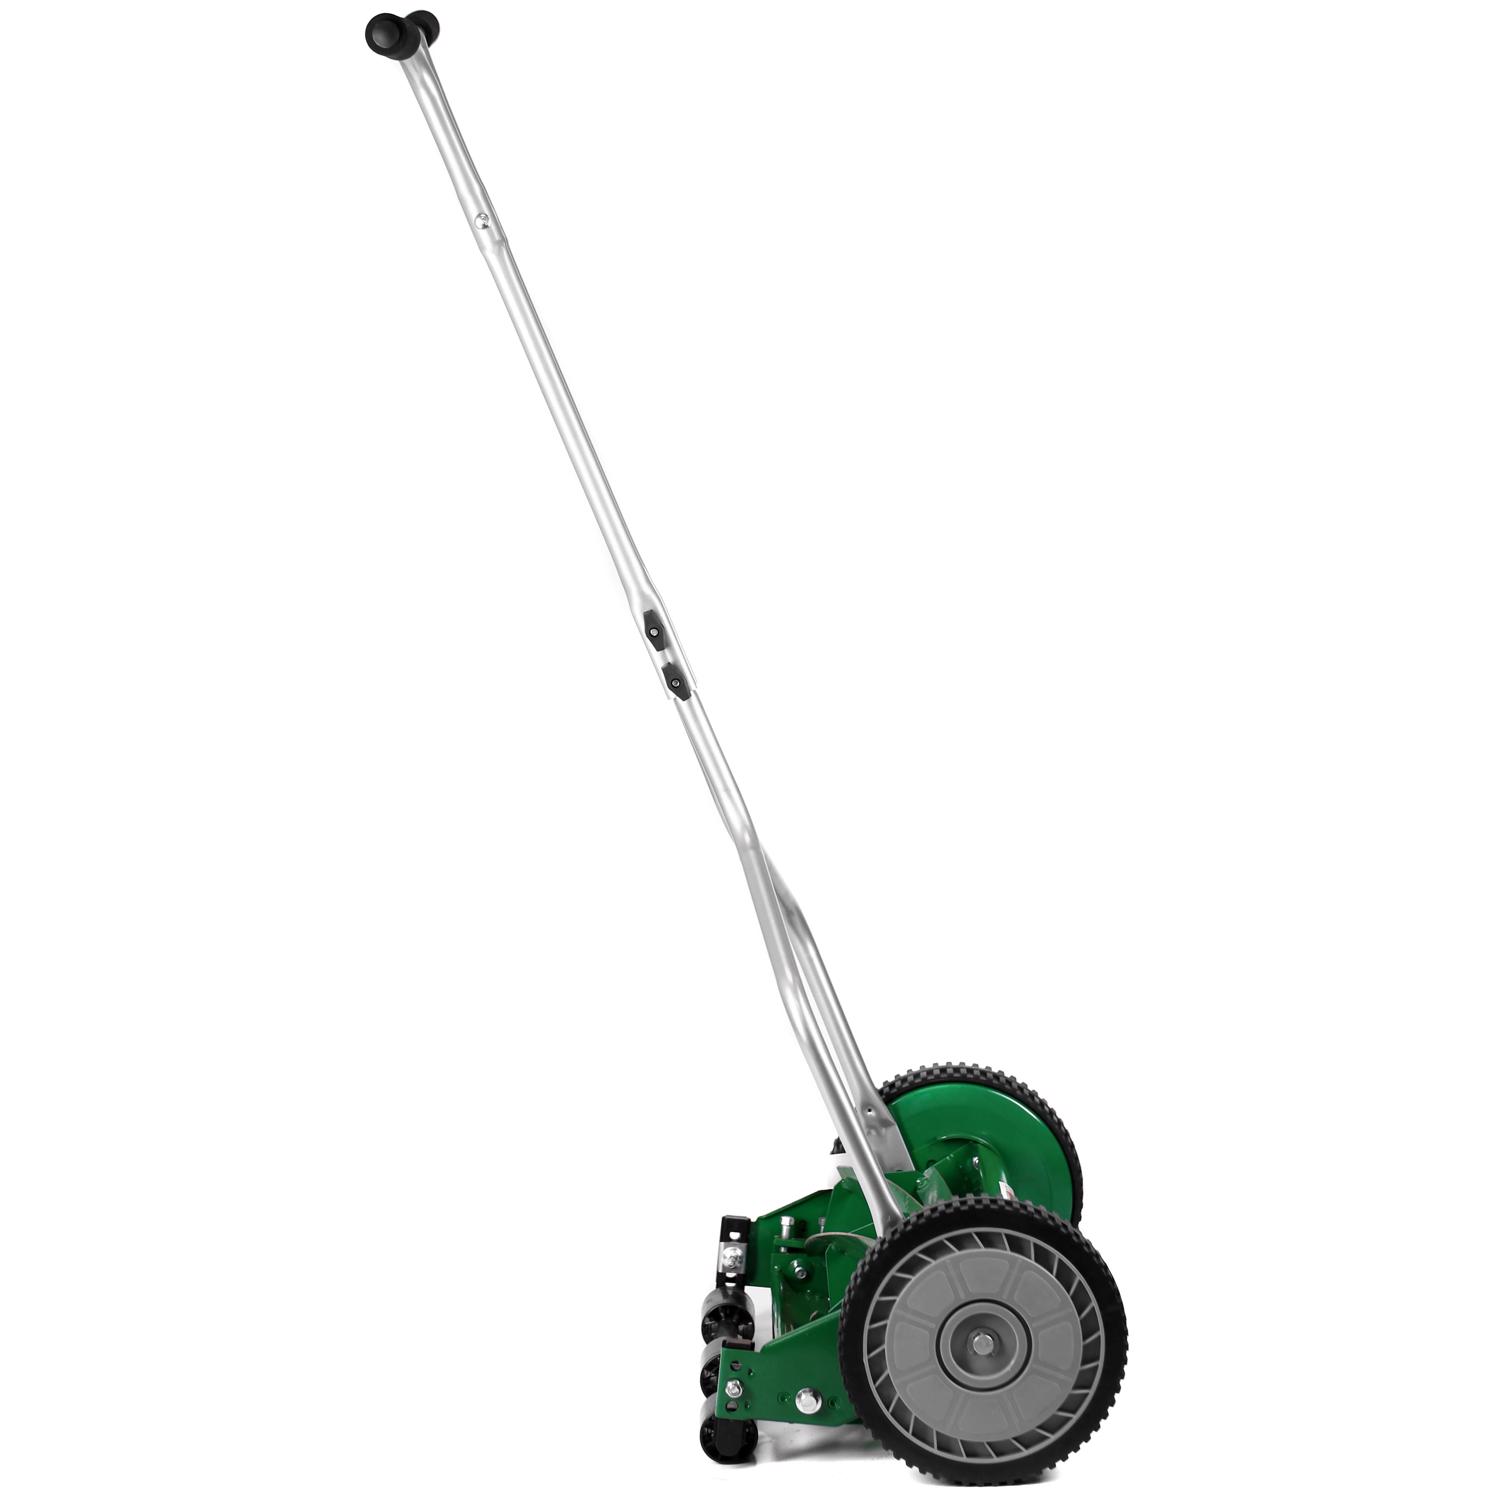 Scotts 14 in. Manual Lawn Mower - Ace Hardware